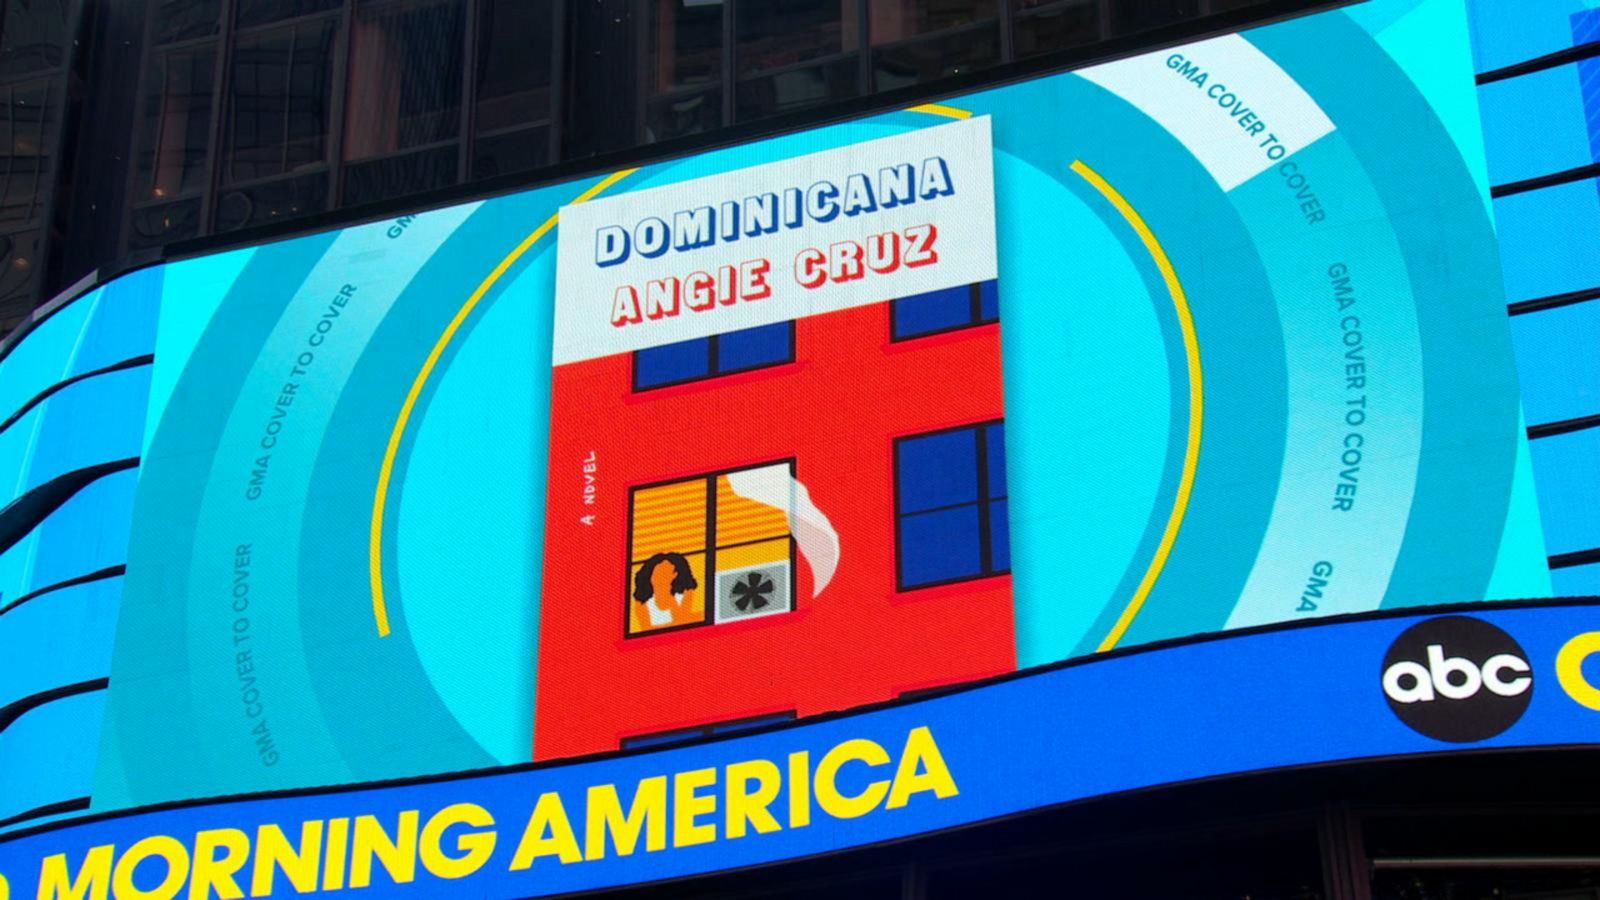 ‘GMA’ Cover to Cover book club launches Good Morning America